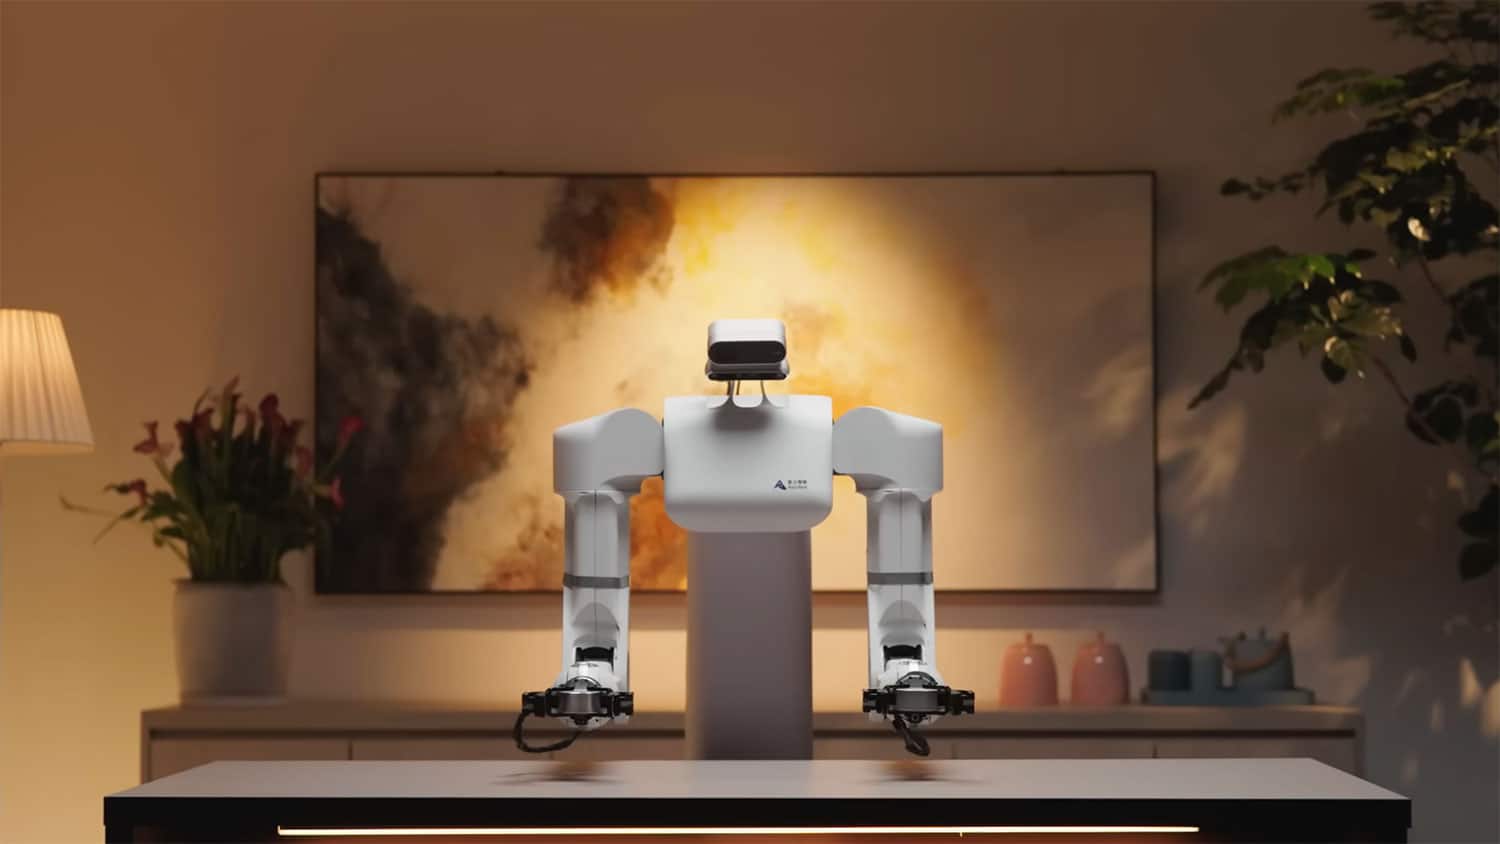 Astribot S1 AI robot impresses with unparalleled agility and accuracy.